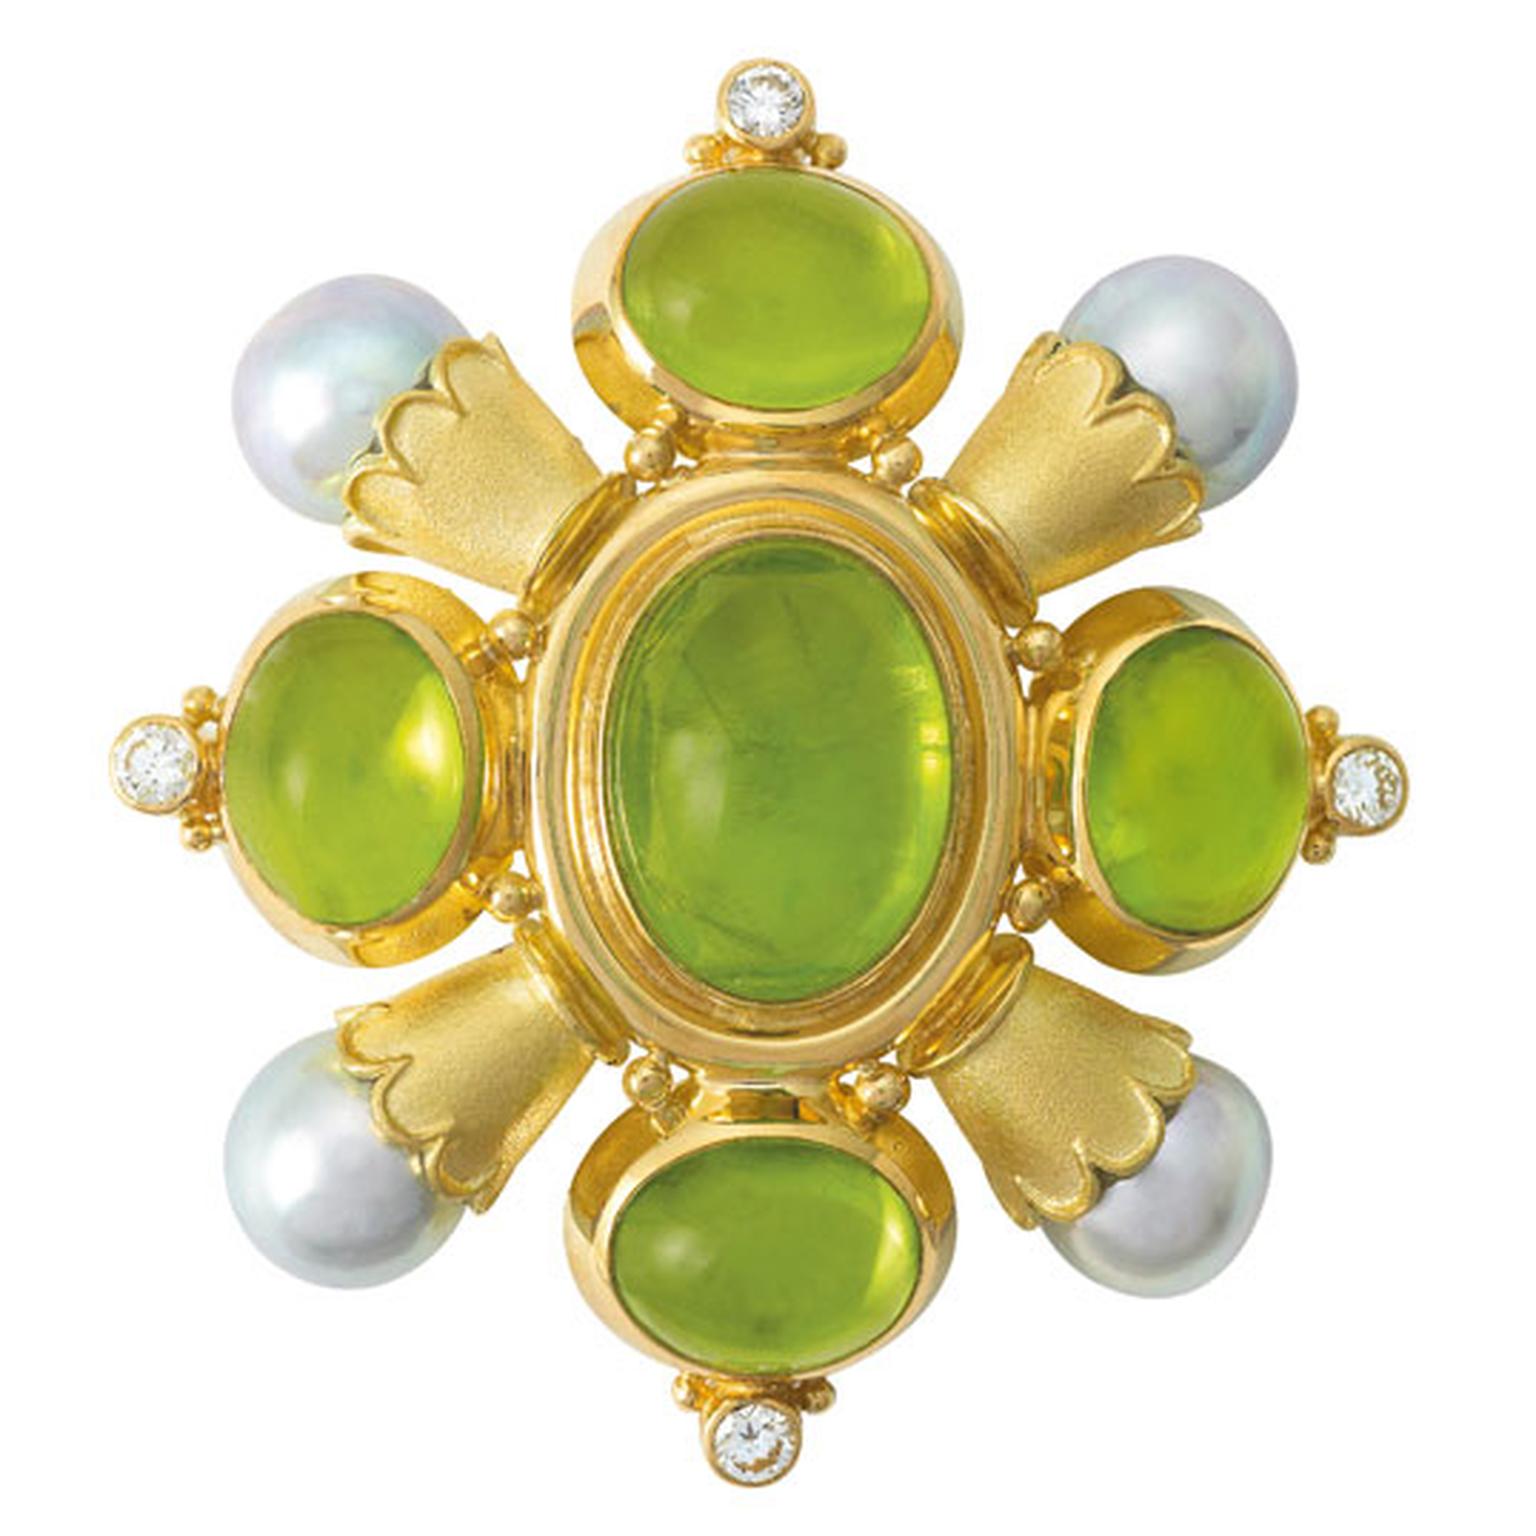 ELIZABETH GAGE, Kiss Pin, A gorgeous set of oval cabochon peridots, cultured akoya pearls in scallop edged gold funnels with diamonds and decorative gold bead detail. £15,600